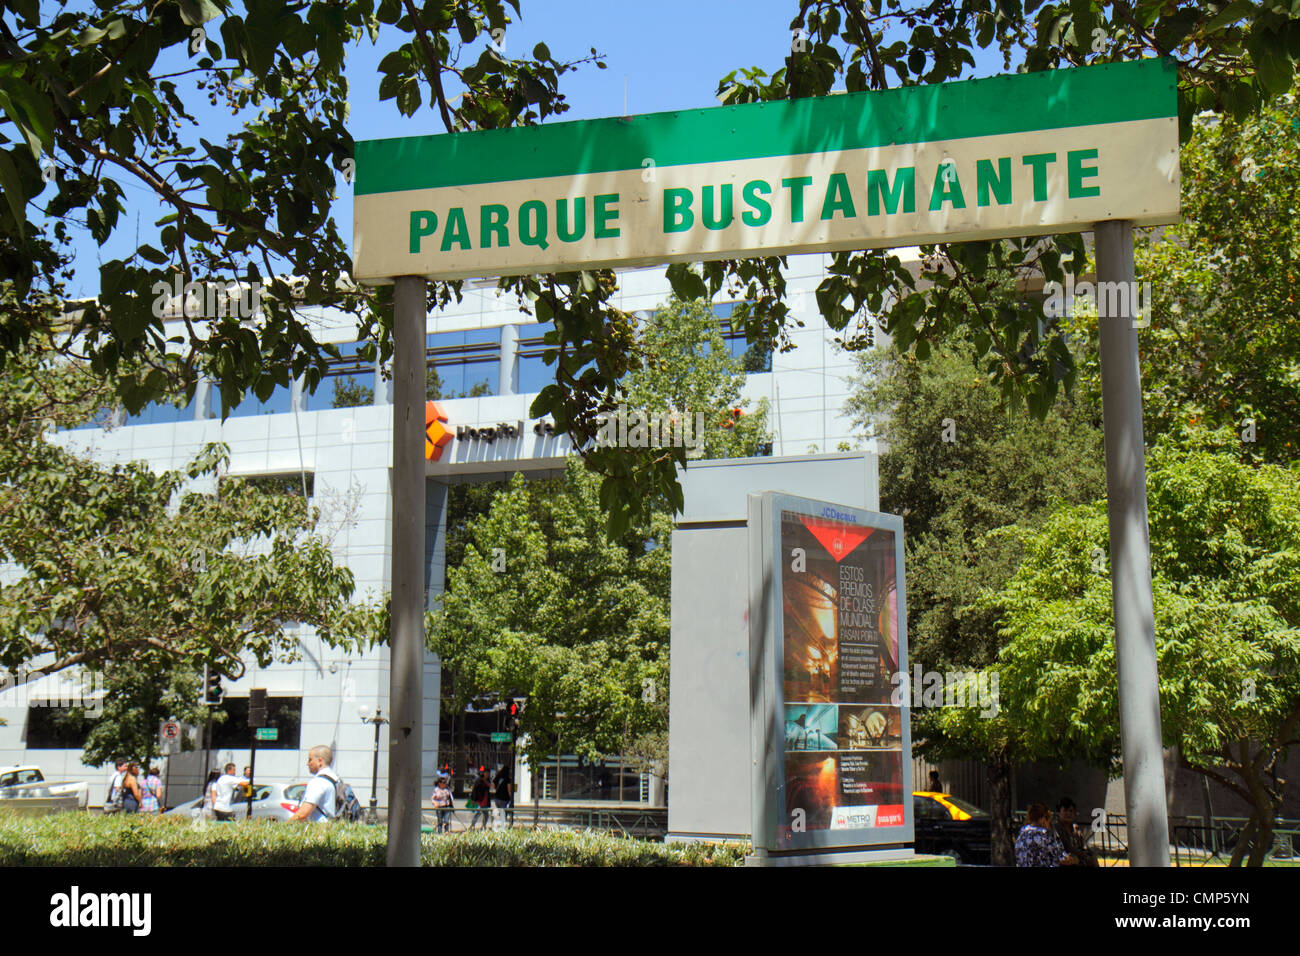 Santiago Chile,Providencia,Metro Station,Parque Bustamante,subway,train,train,entrance,sign,promotional poster,park,trees,Latin America,South Chile120 Stock Photo